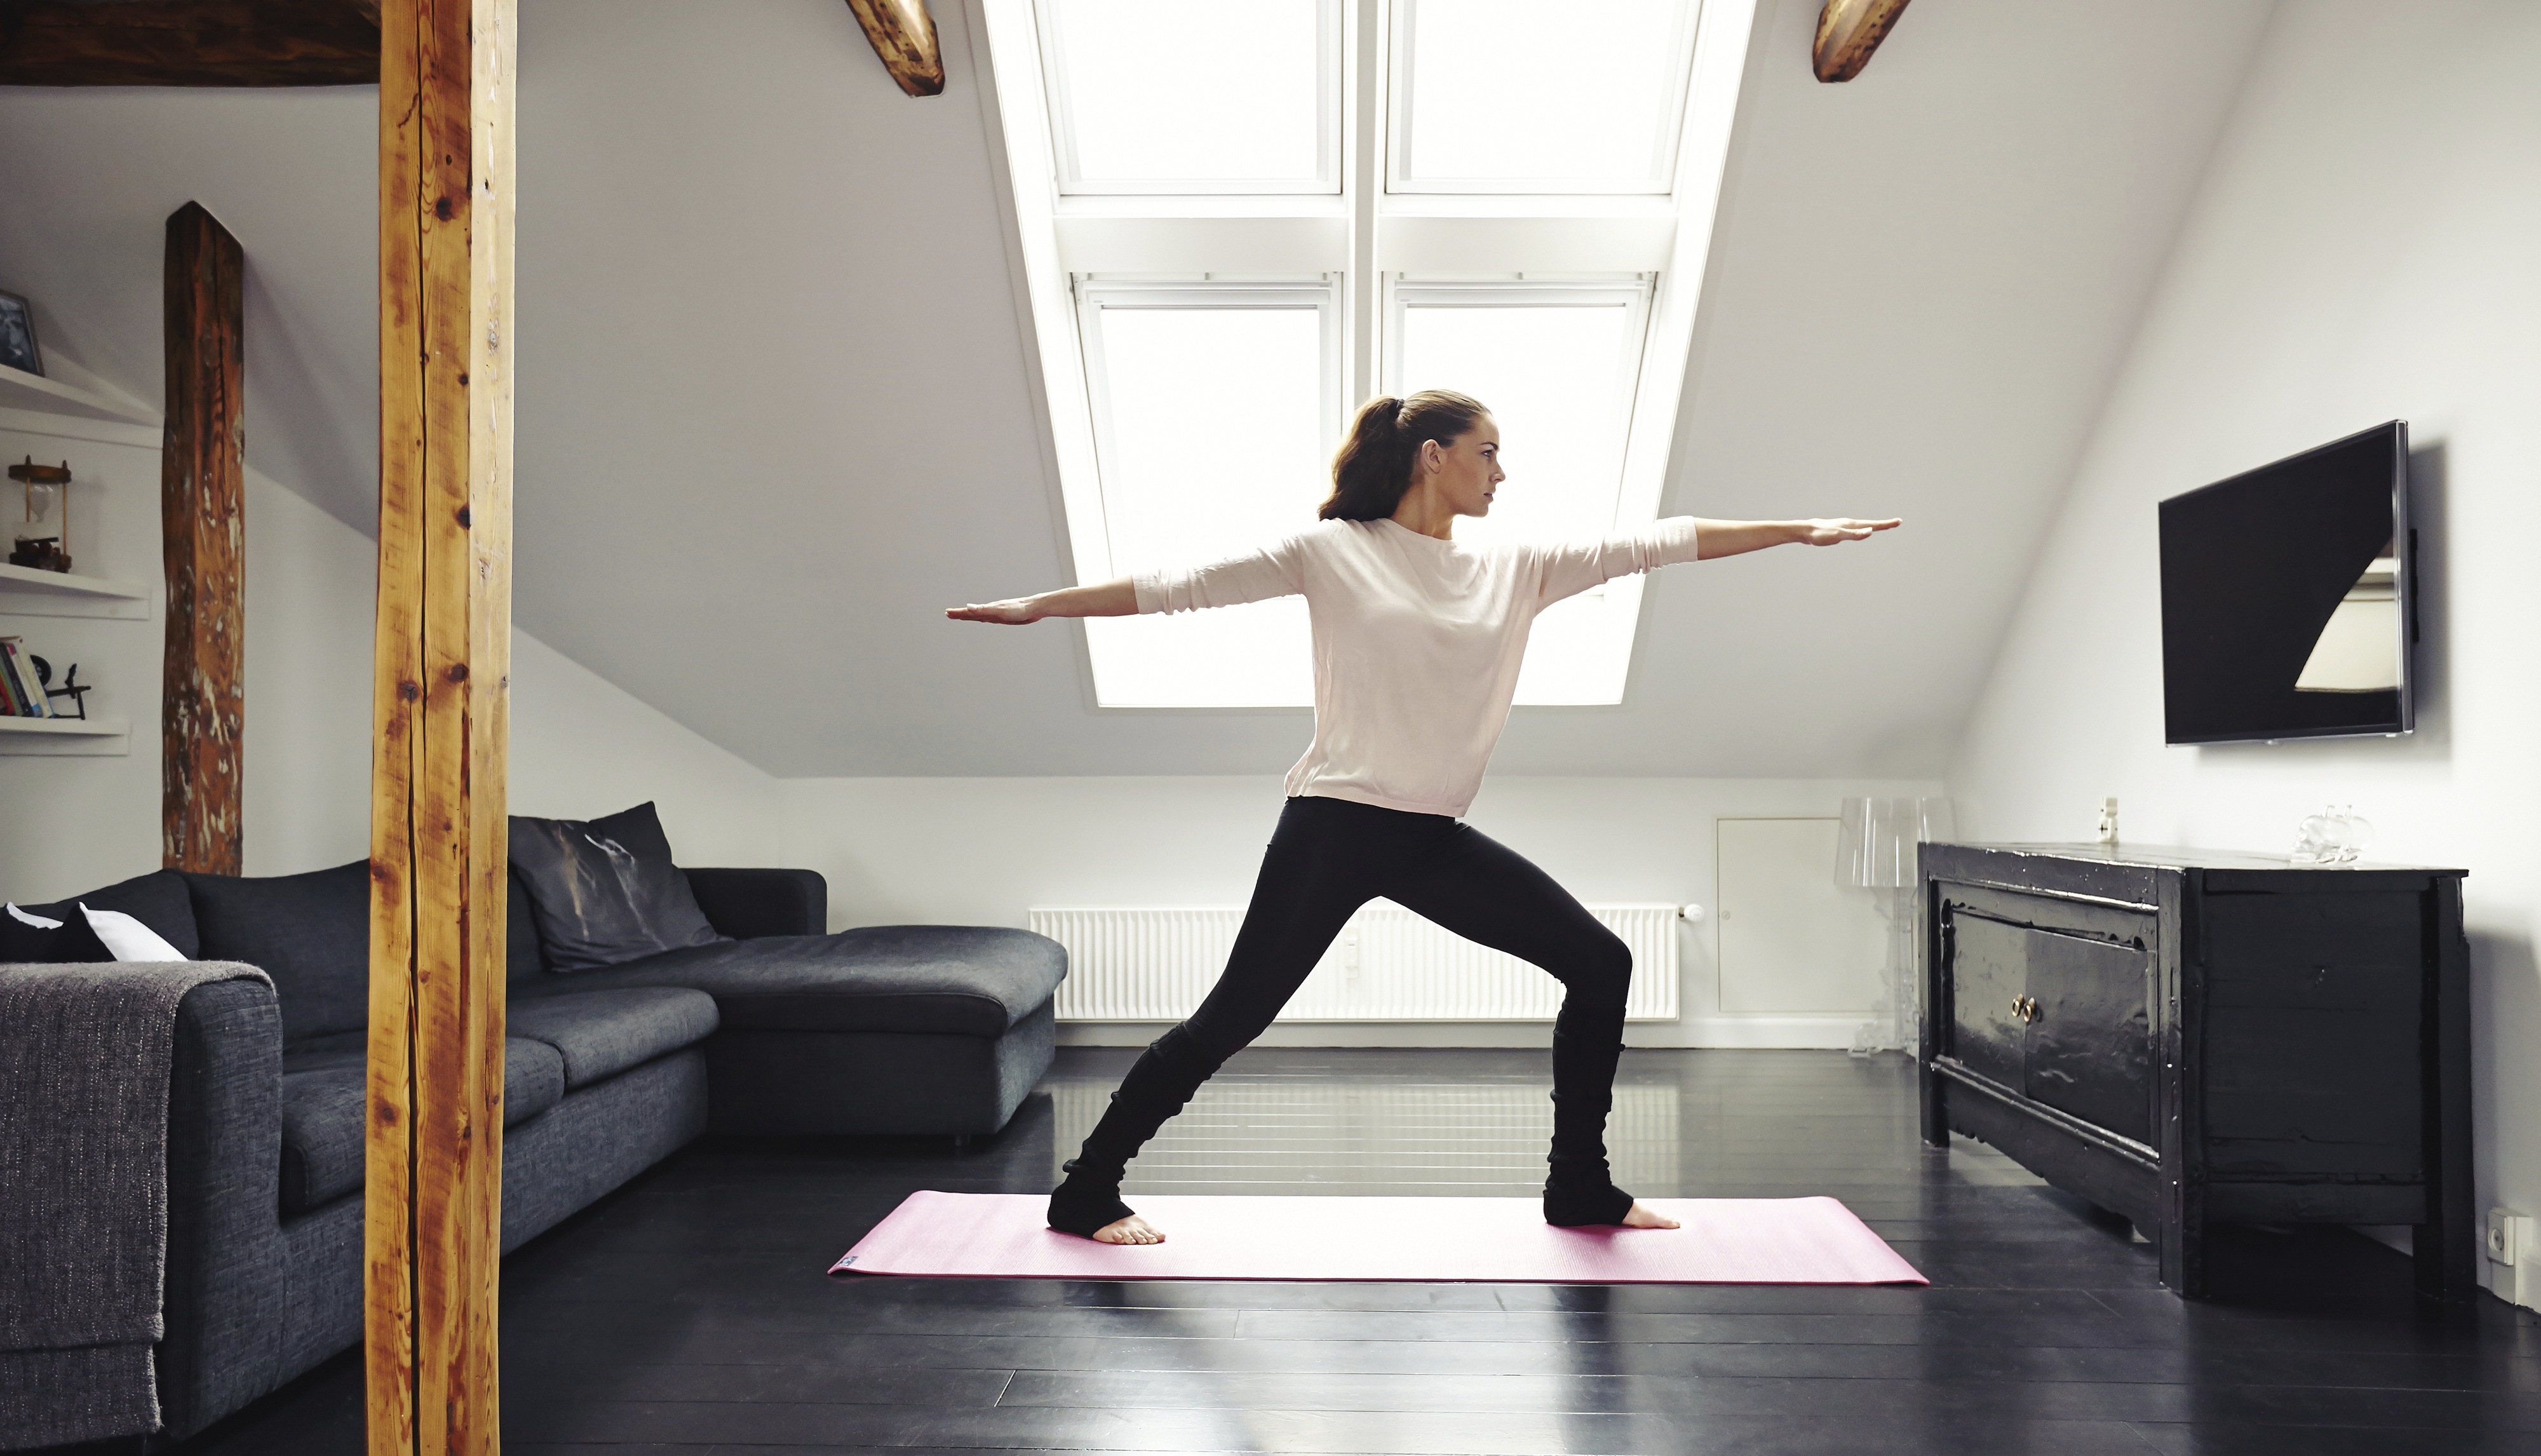 Yoga in your living room? D.C.'s on-demand app offers in-home lifestyle services | WTOP